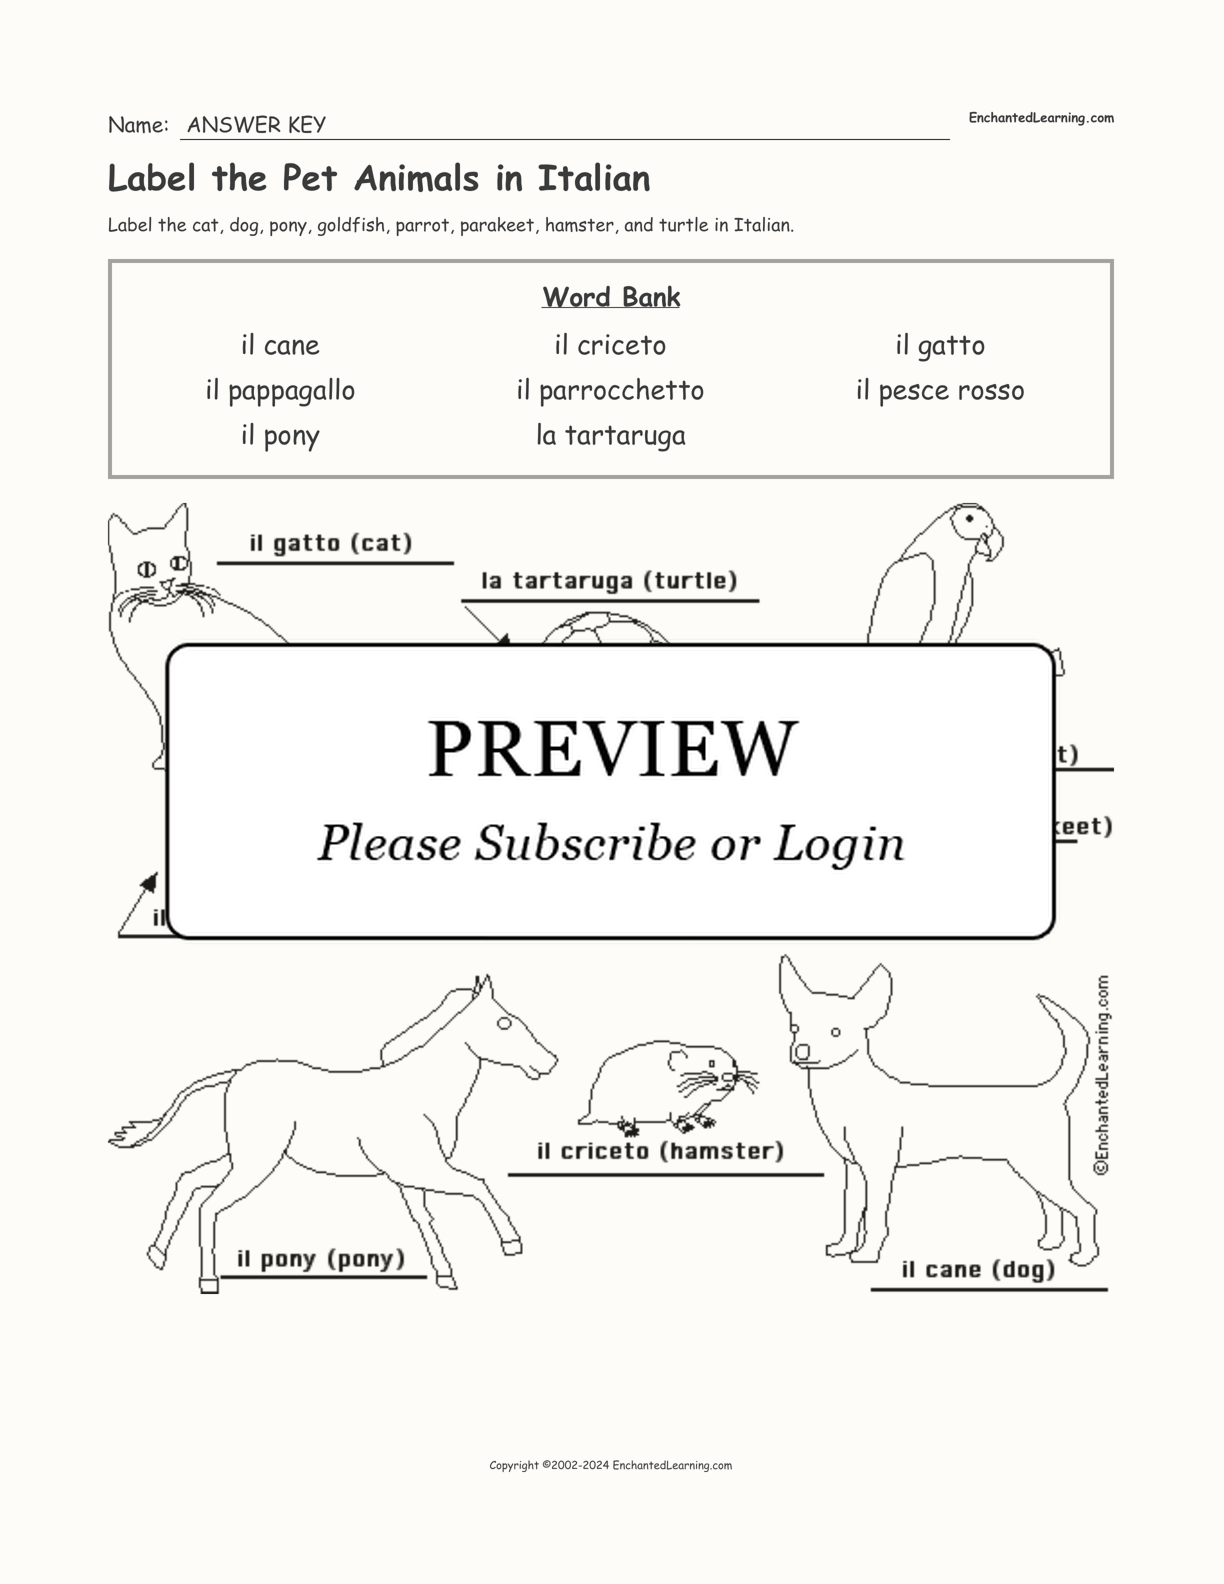 Label the Pet Animals in Italian interactive worksheet page 2